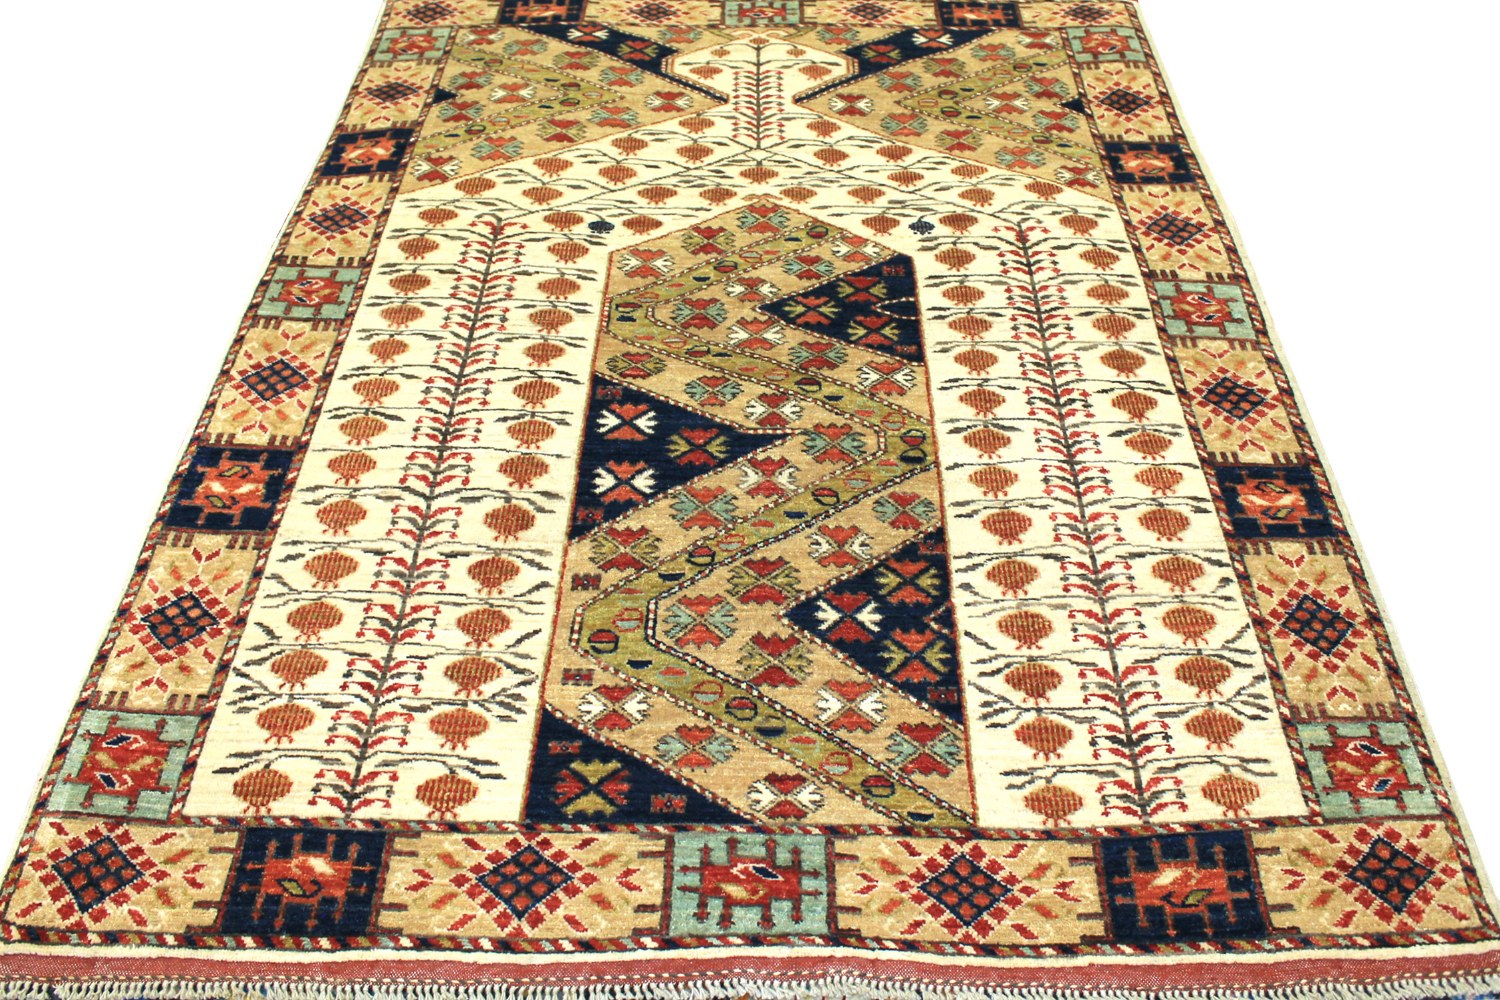 5x7/8 Antique Revival Hand Knotted Wool Area Rug - MR20897